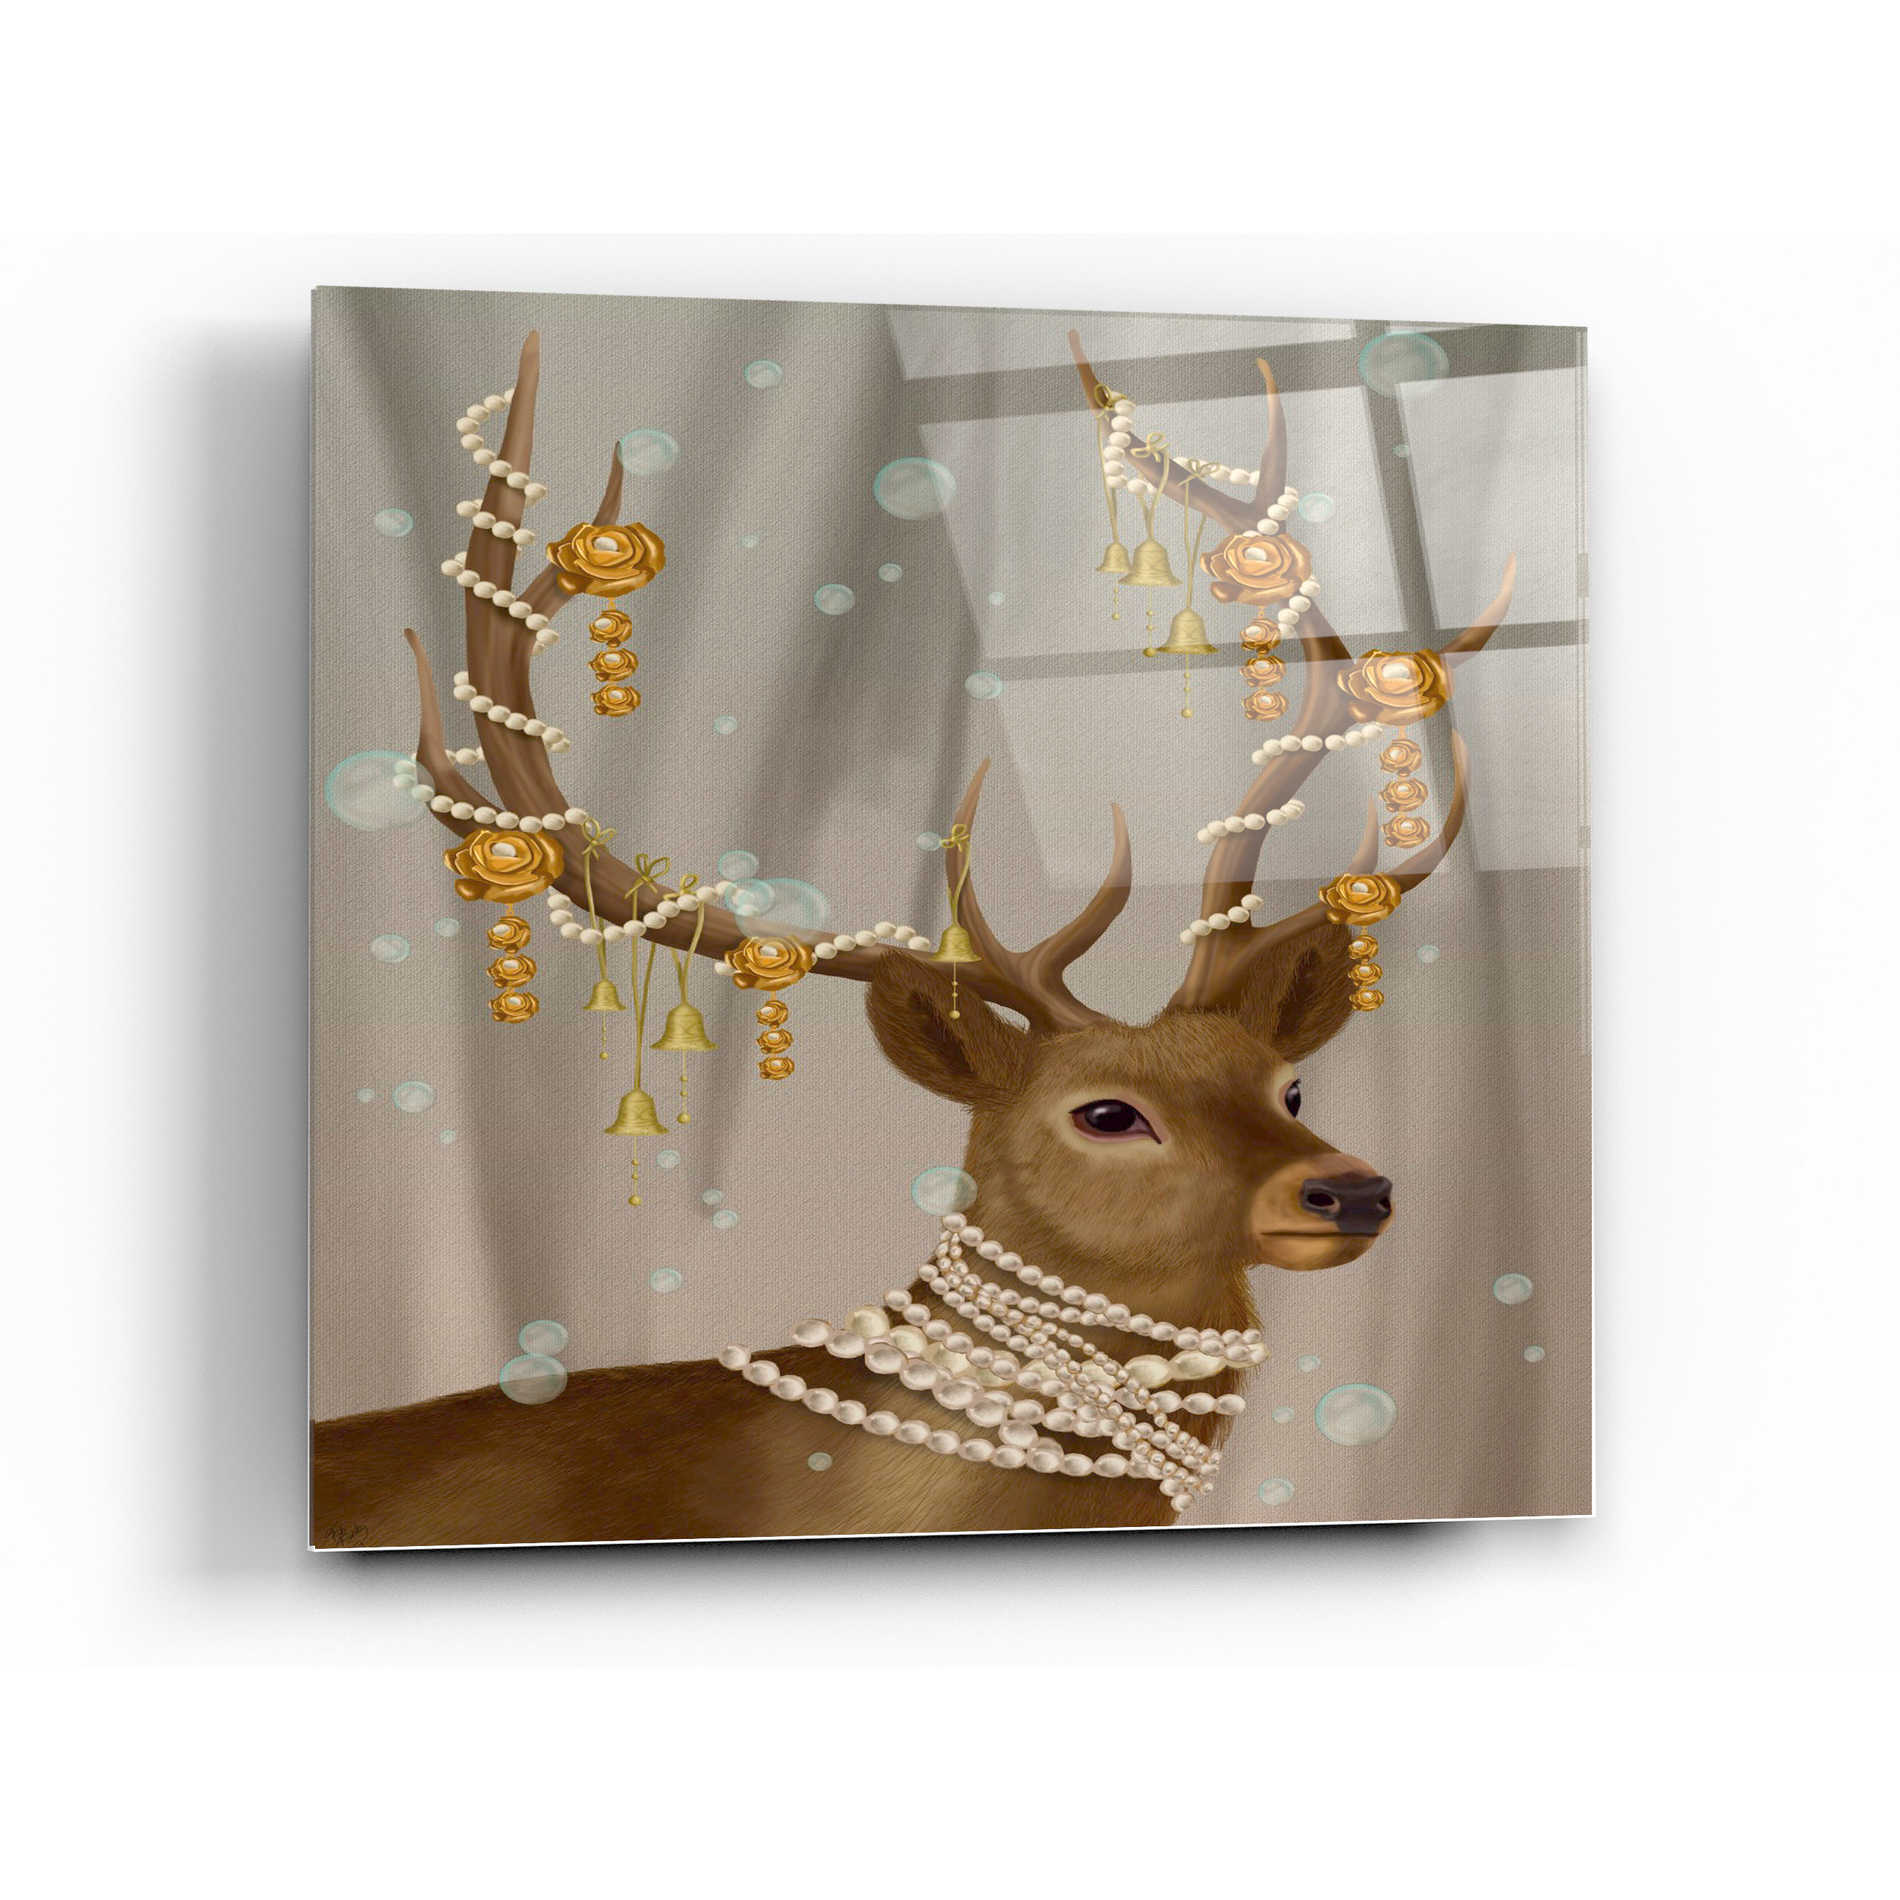 Epic Art 'Deer with Gold Bells' by Fab Funky Acrylic Glass Wall Art,24x24